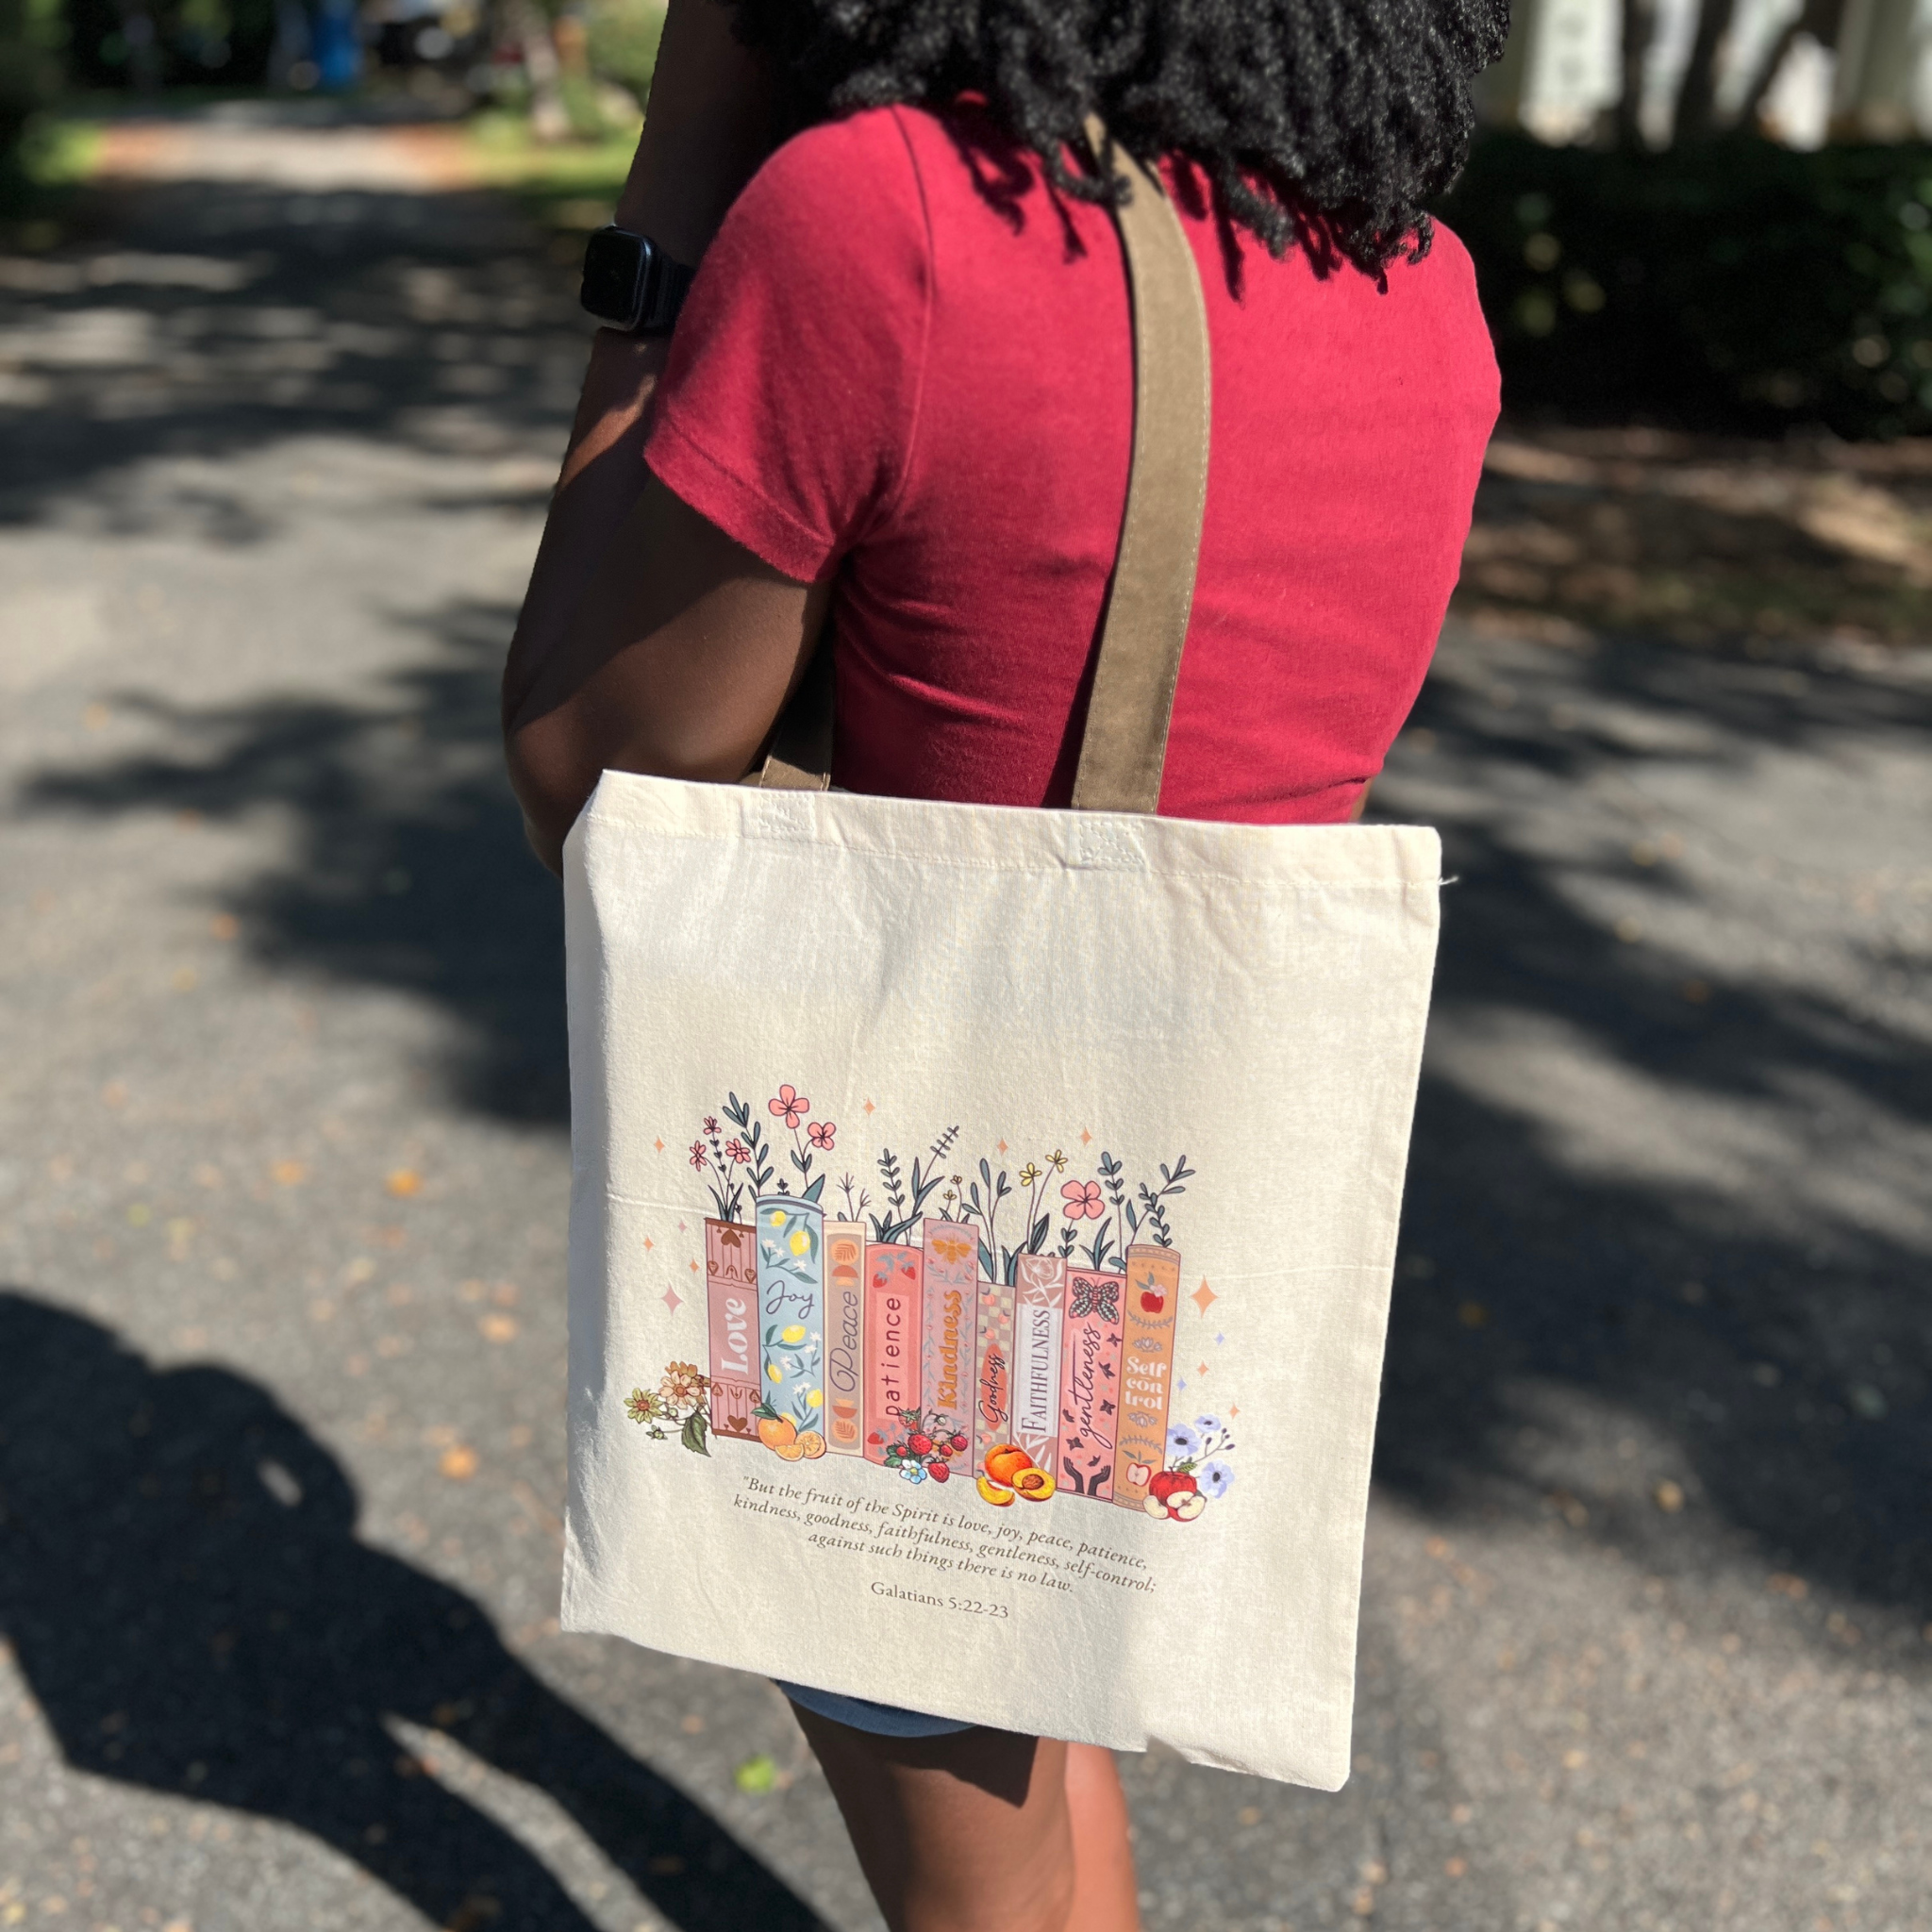 Fruits of The Spirit Tote Bag